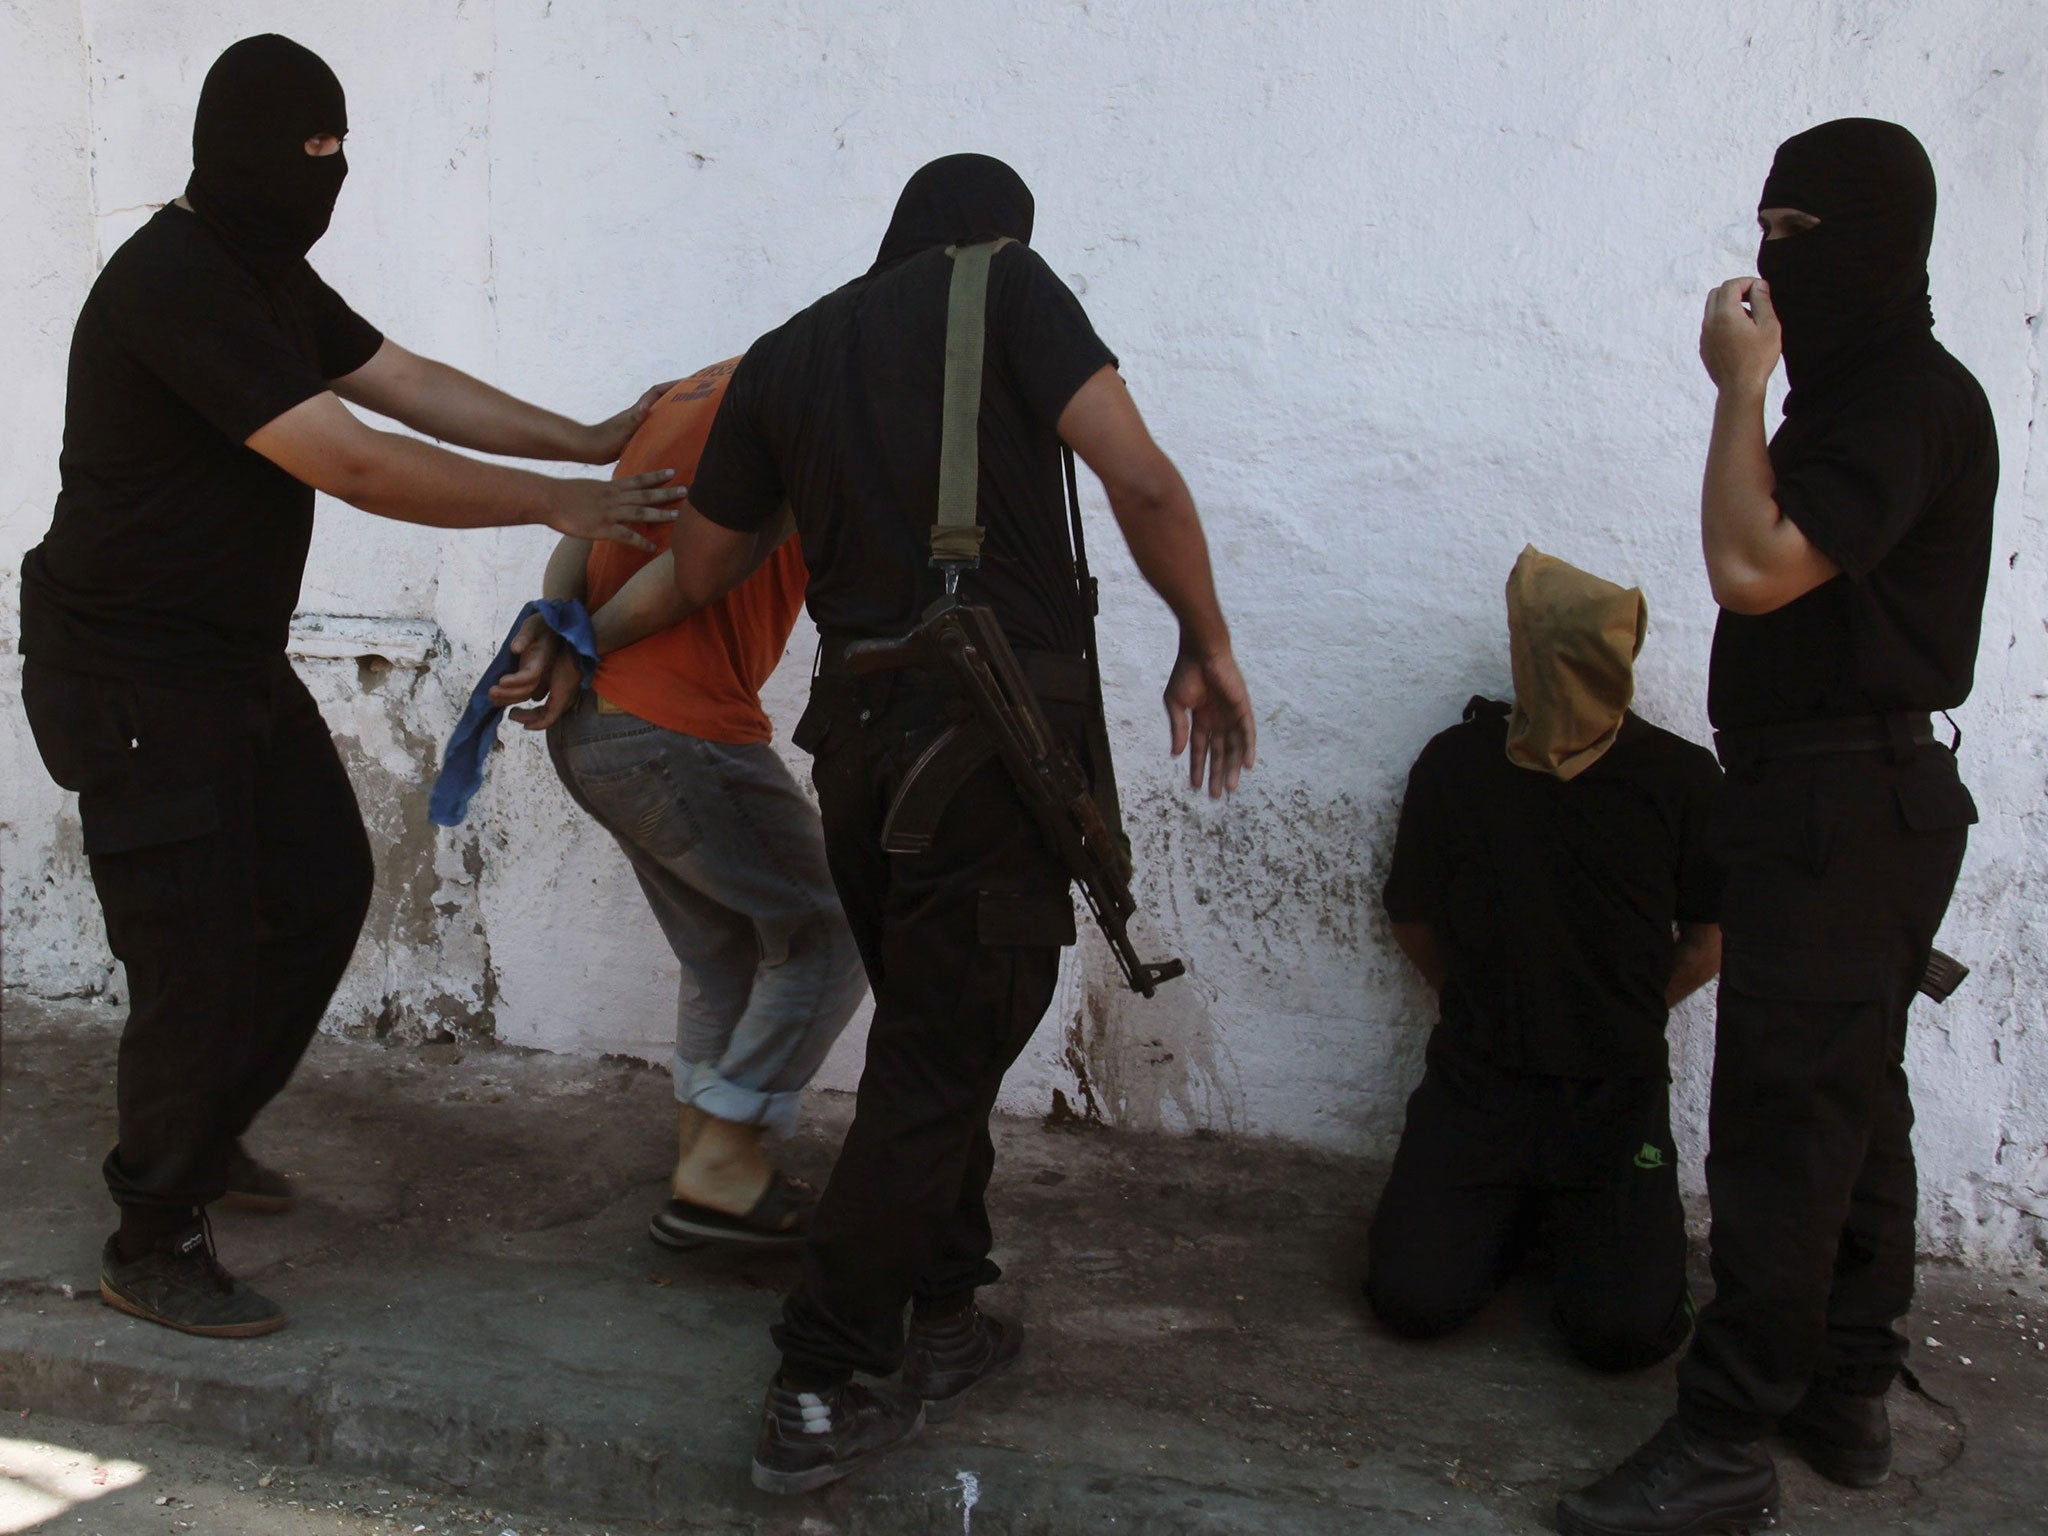 Hamas militants surround Palestinians suspected of collaborating with Israel before executing them in Gaza City August 22, 2014.